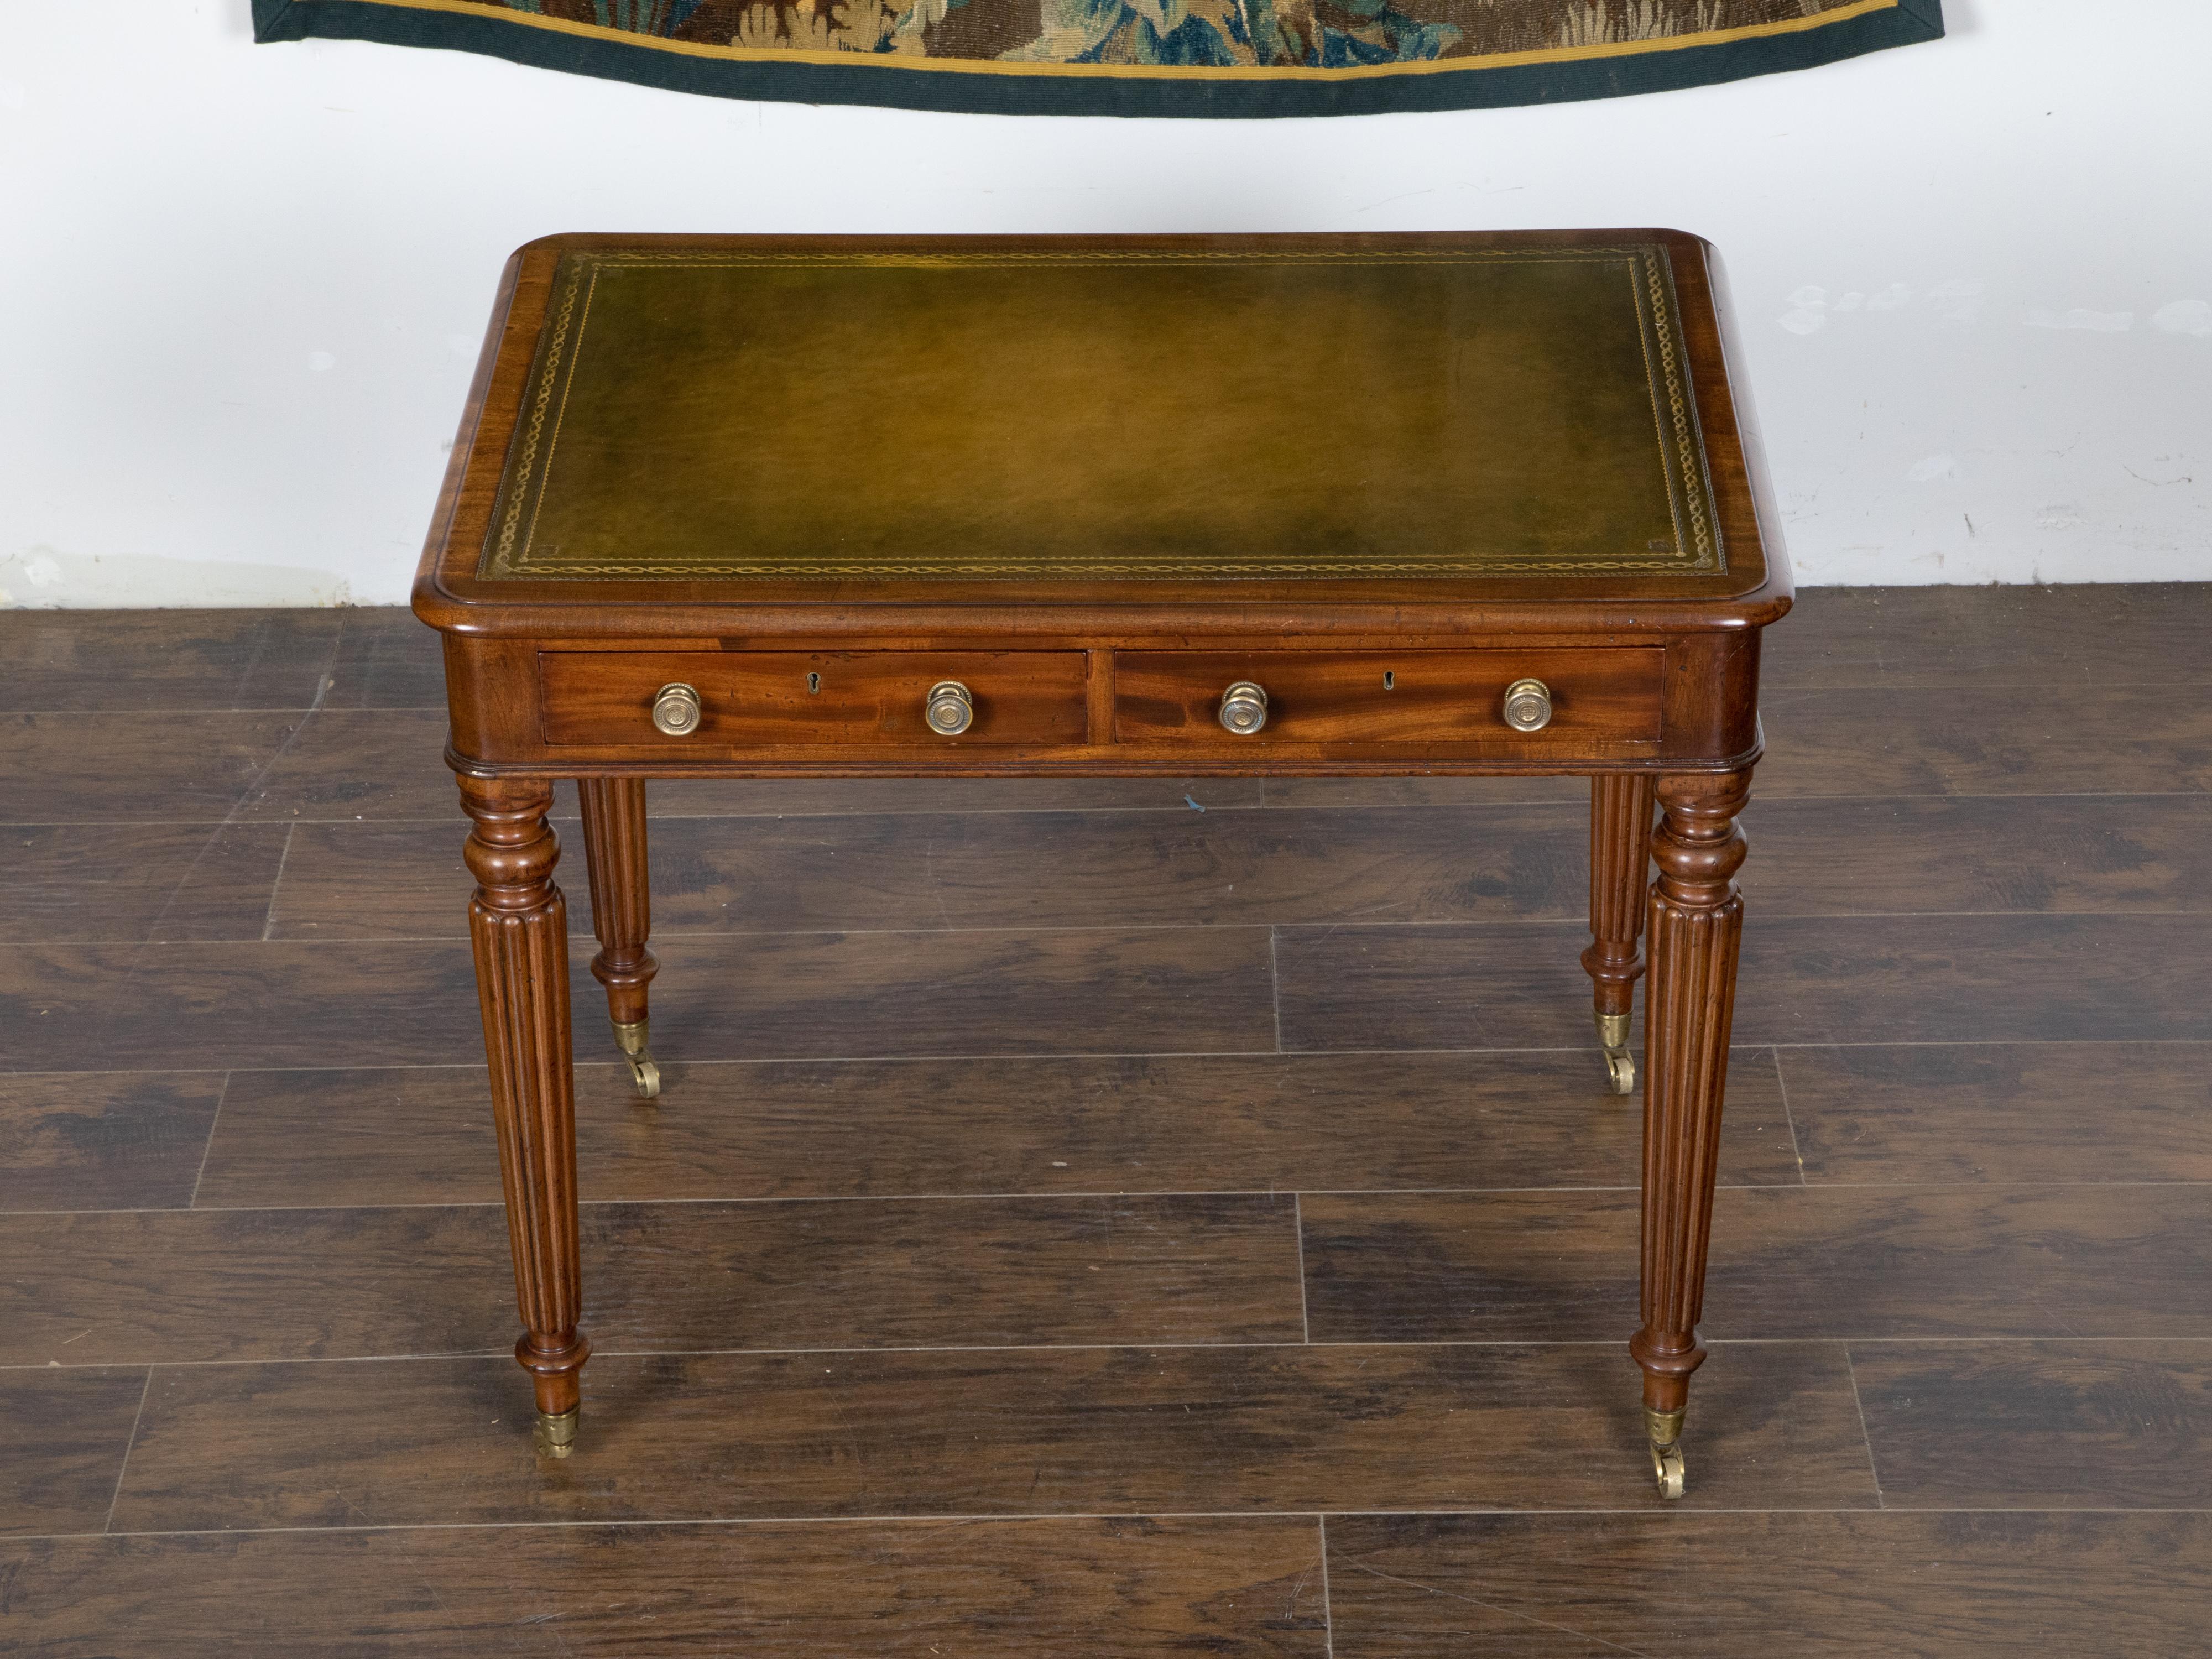 An English mahogany writing table from the 19th century, with green leather top, gilt accents, carved reeded legs, two drawers and brass casters. Created in England during the 19th century, this desk features a rectangular top with rounded corners,